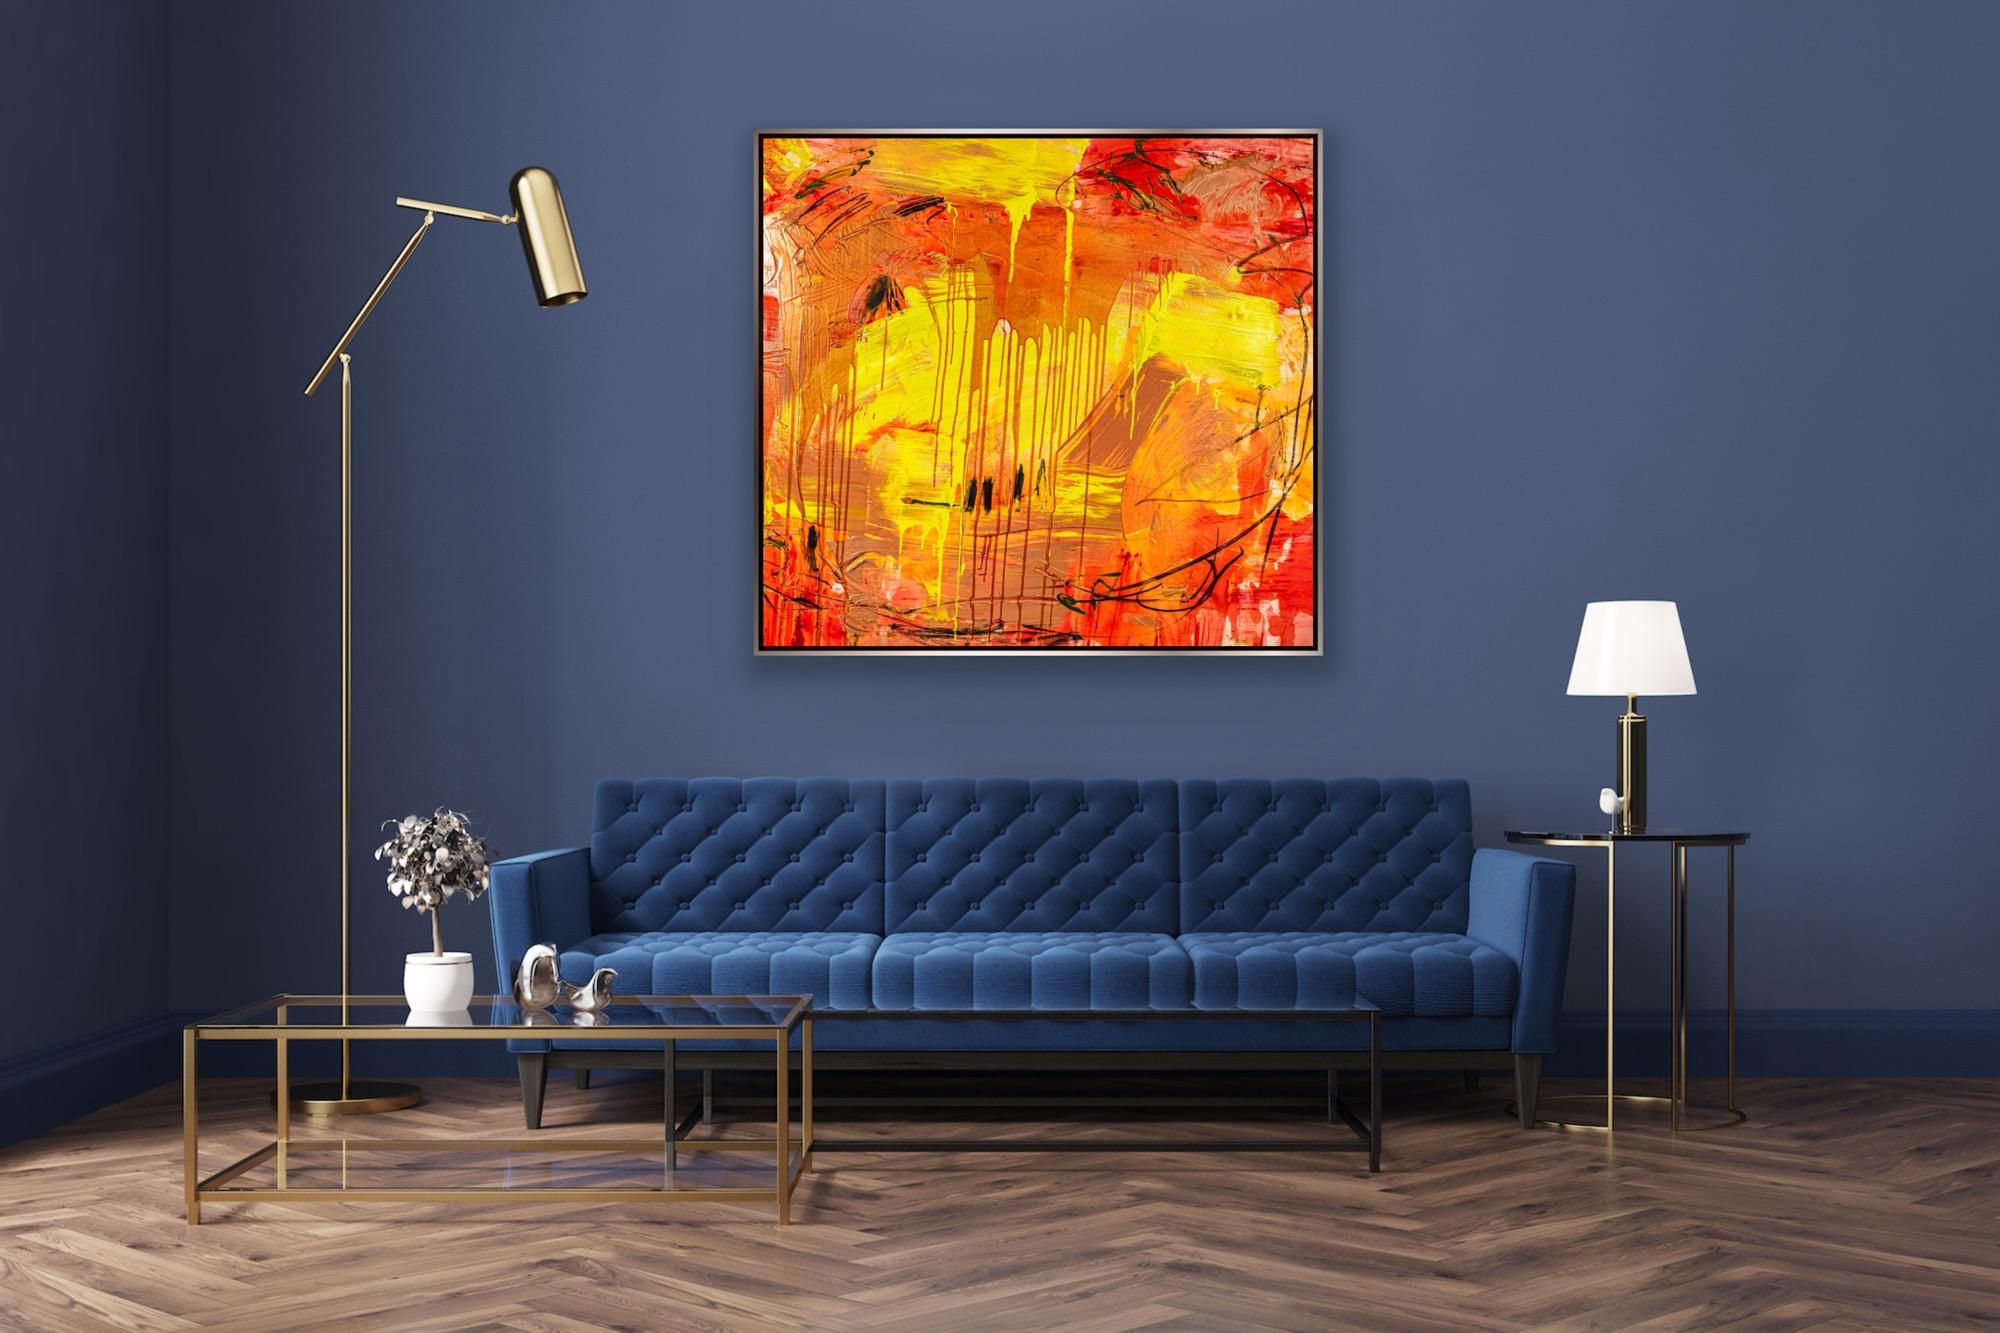 Temple Ruins - Orange Abstract Painting by Francine Tint